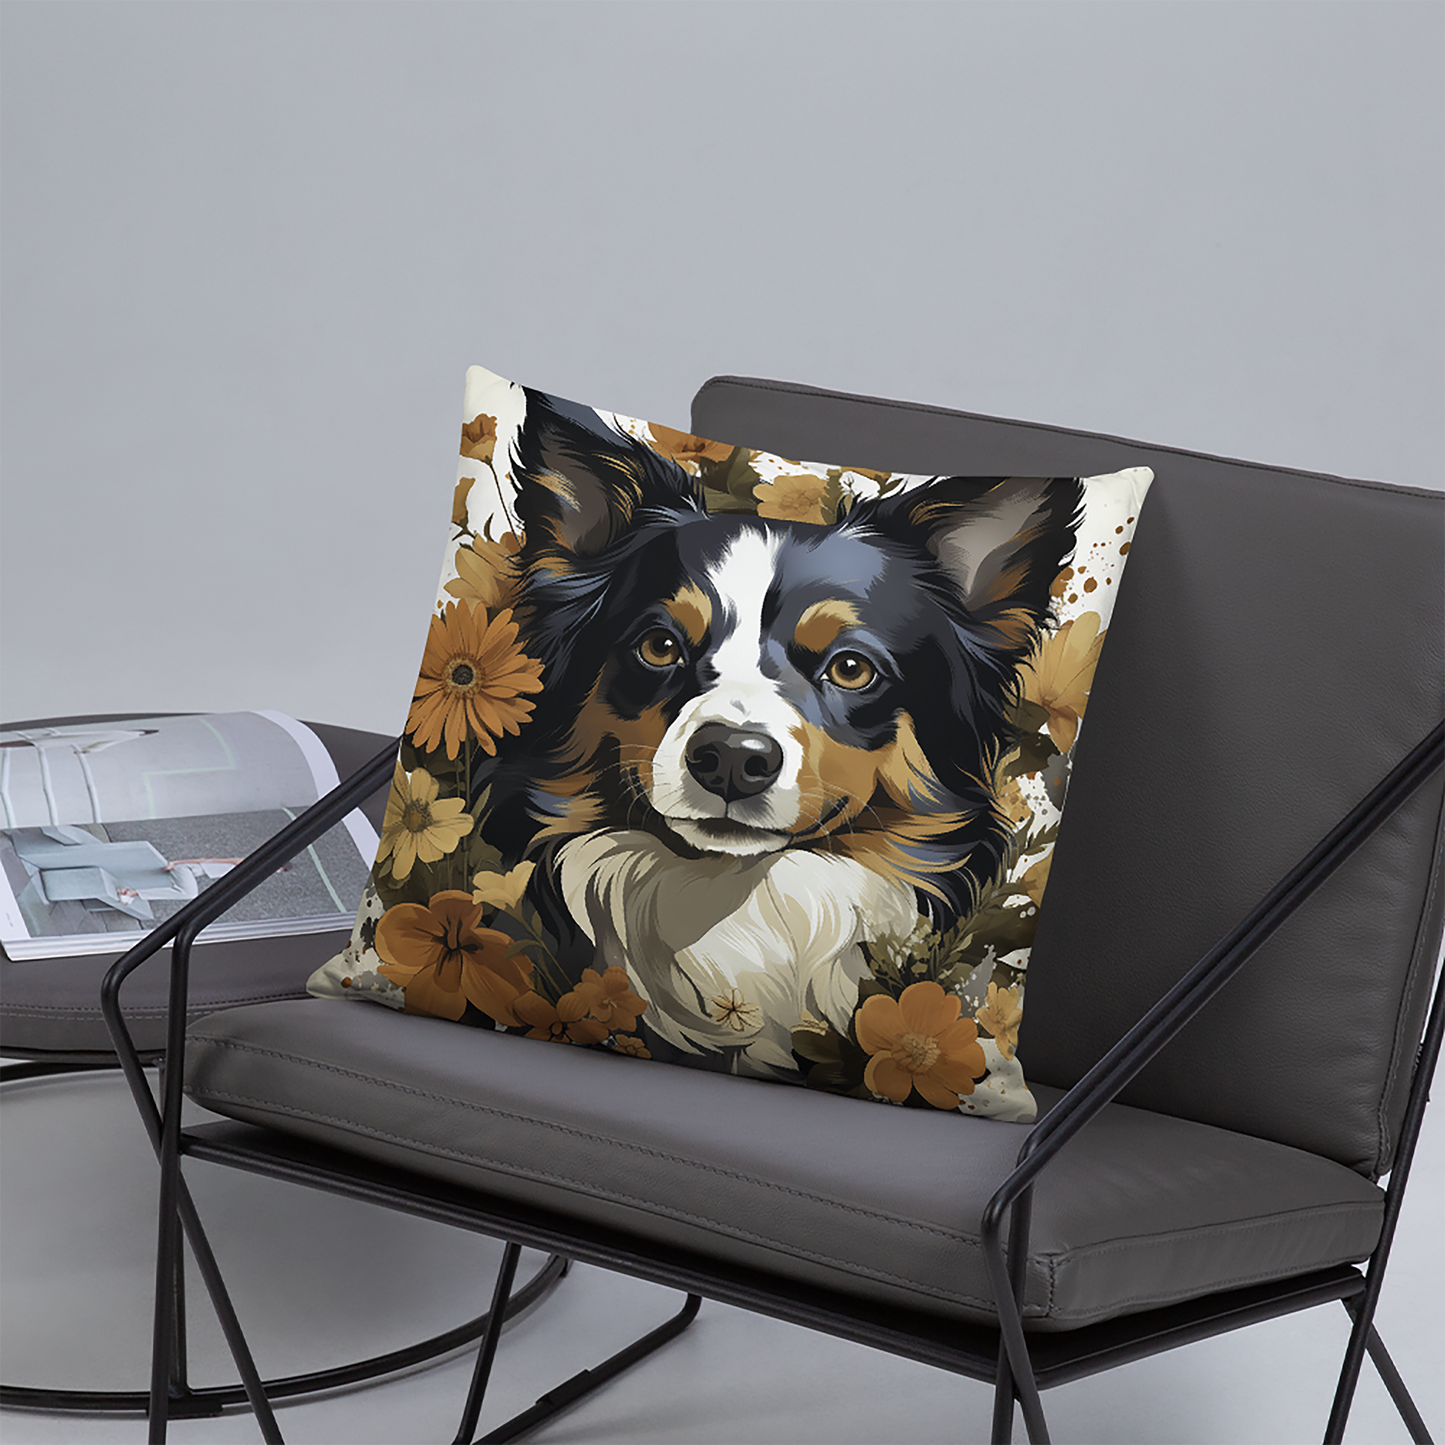 Dog Throw Pillow Floral Crowned Border Collie Polyester Decorative Cushion 18x18